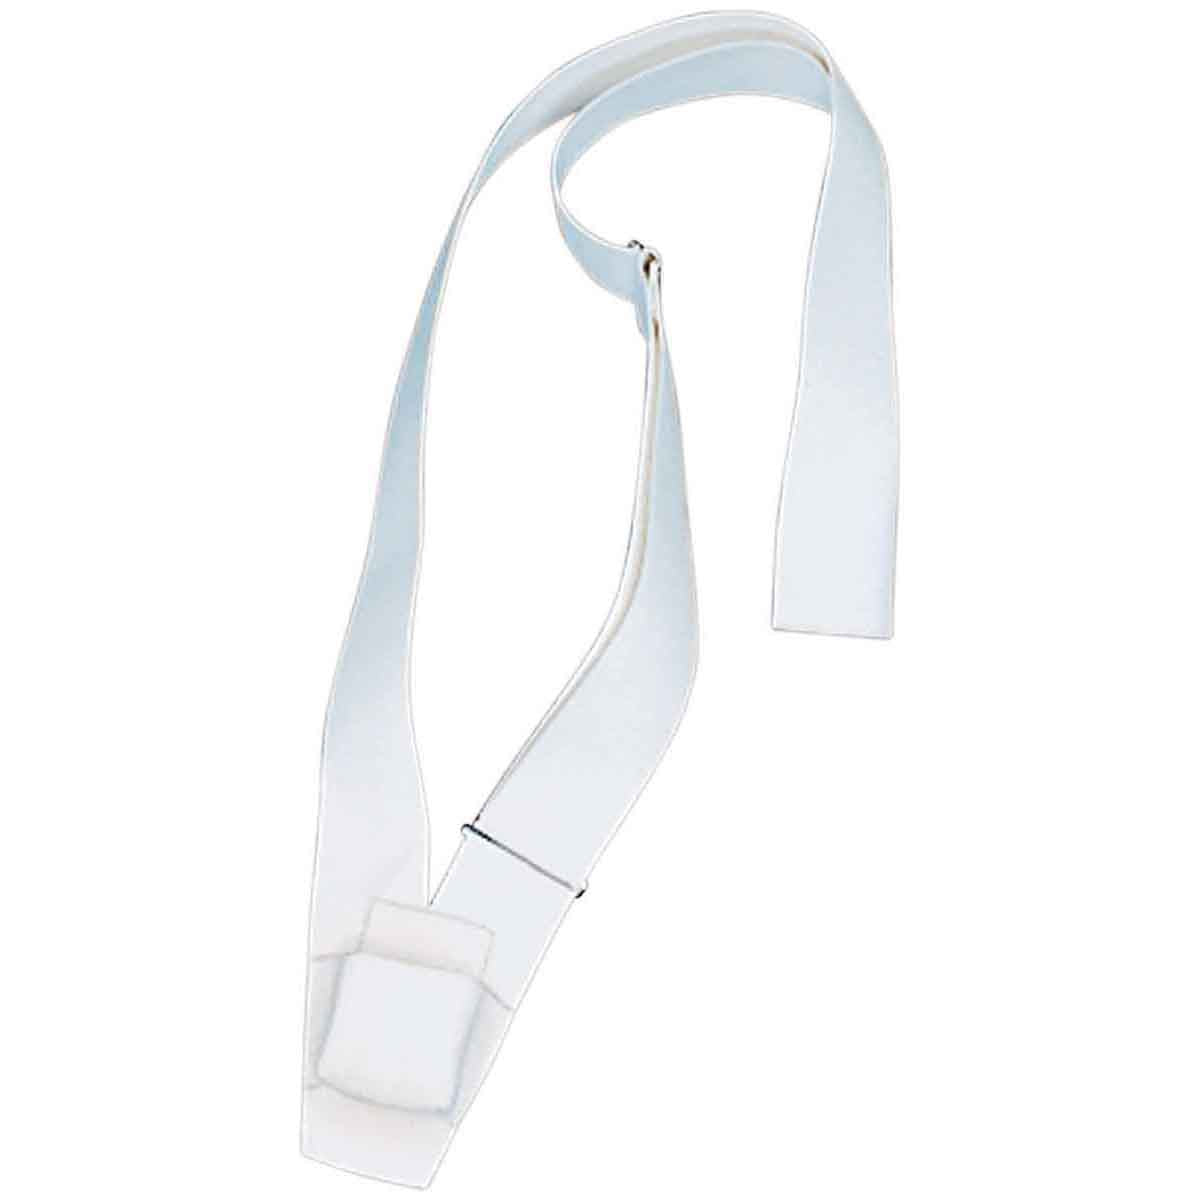 Single Strap White Web Carrying Belt, with woven pole pocket.